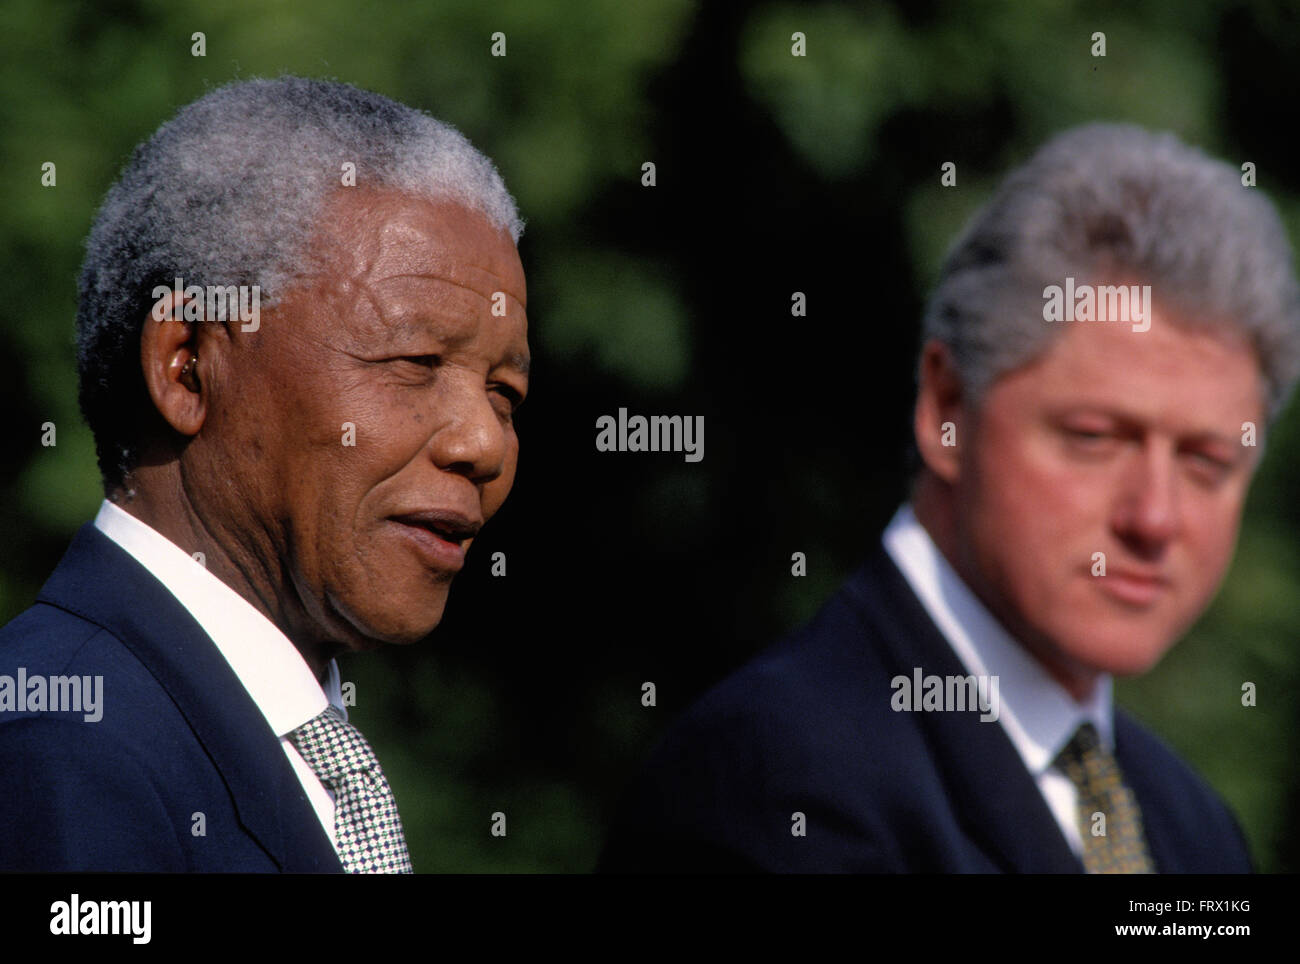 Washington, DC., USA, 5th October, 1994 President William Jefferson Clinton hosts South African President Nelson Mandella at the White House. Mandella was a South African anti-apartheid revolutionary, politician and philanthropist who served as President of South Africa from 1994 to 1999. He was South Africa's first black chief executive, and the first elected in a fully representative democratic election. His government focused on dismantling the legacy of apartheid through tackling institutionalized racism, poverty and inequality, and fostering racial reconciliation. Credit: Mark Reinstein Stock Photo